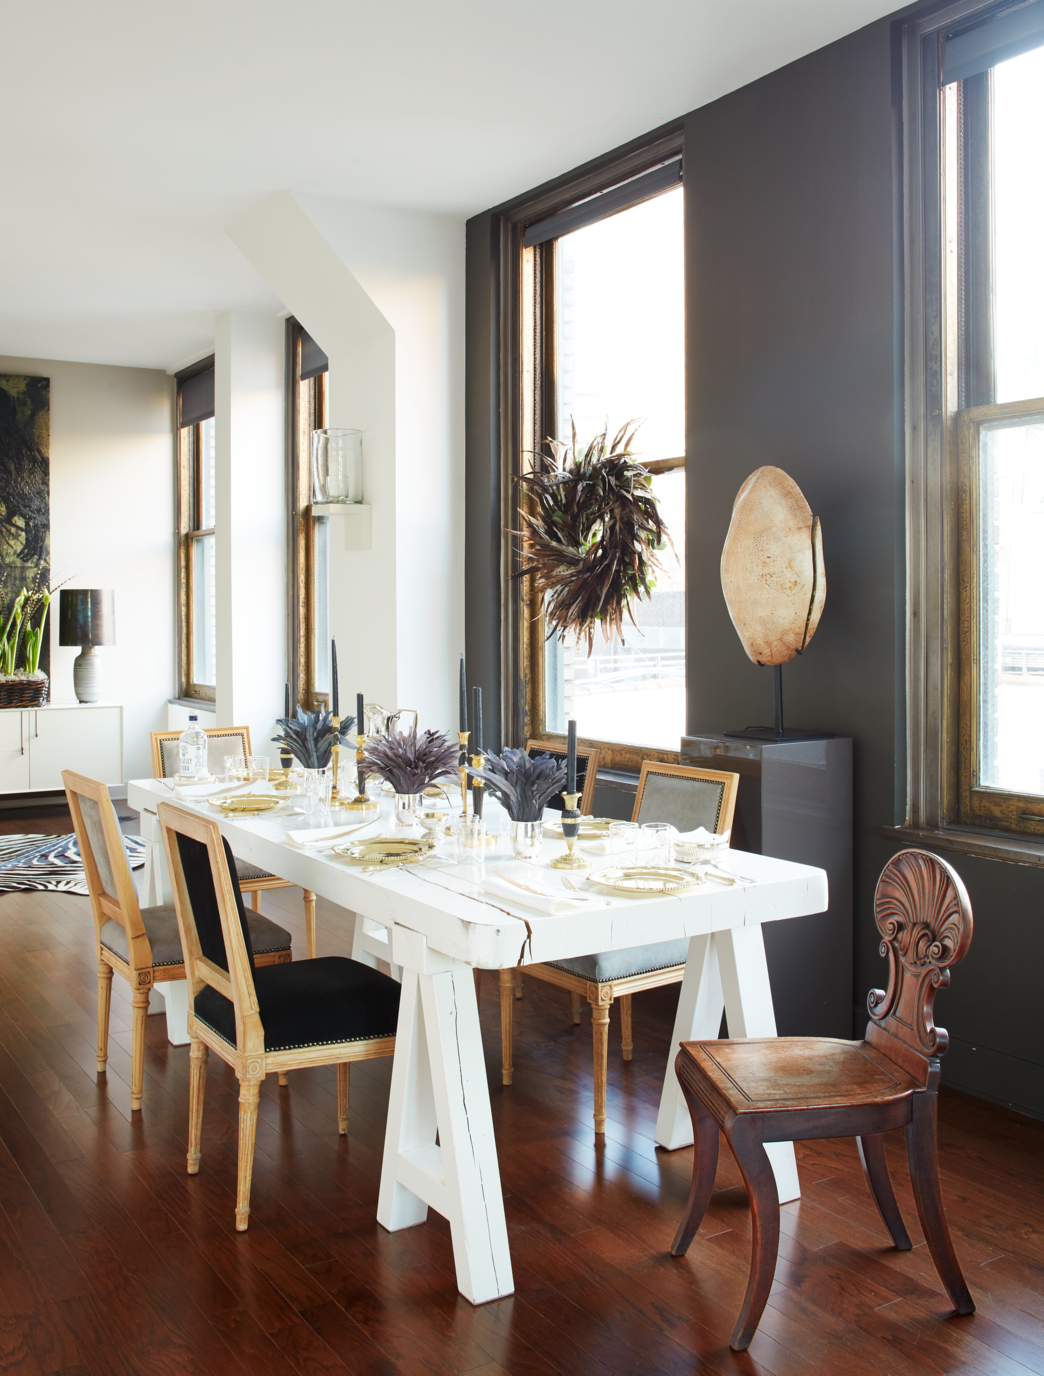 30 Best Dining Room Paint Colors, Dining Room Wall Colors With Black Furniture